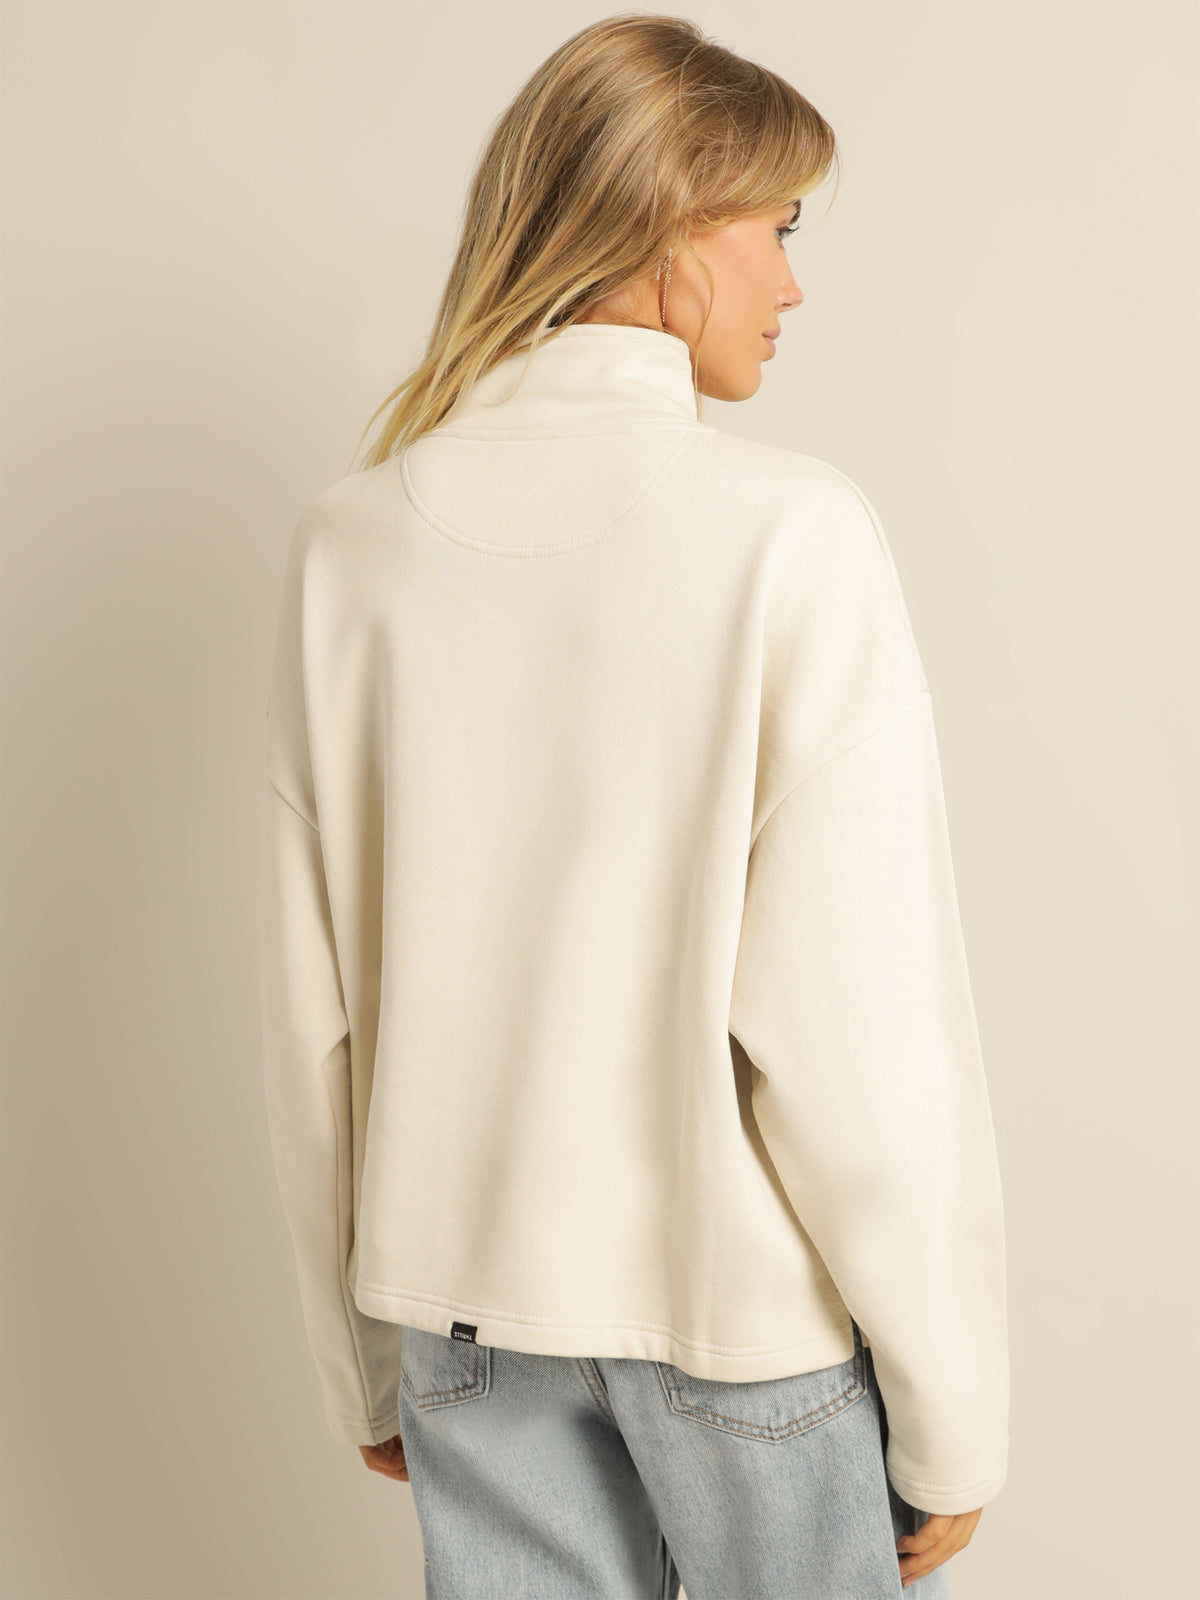 Thrills Limitless 3/4 Zip Pullover in Heritage White